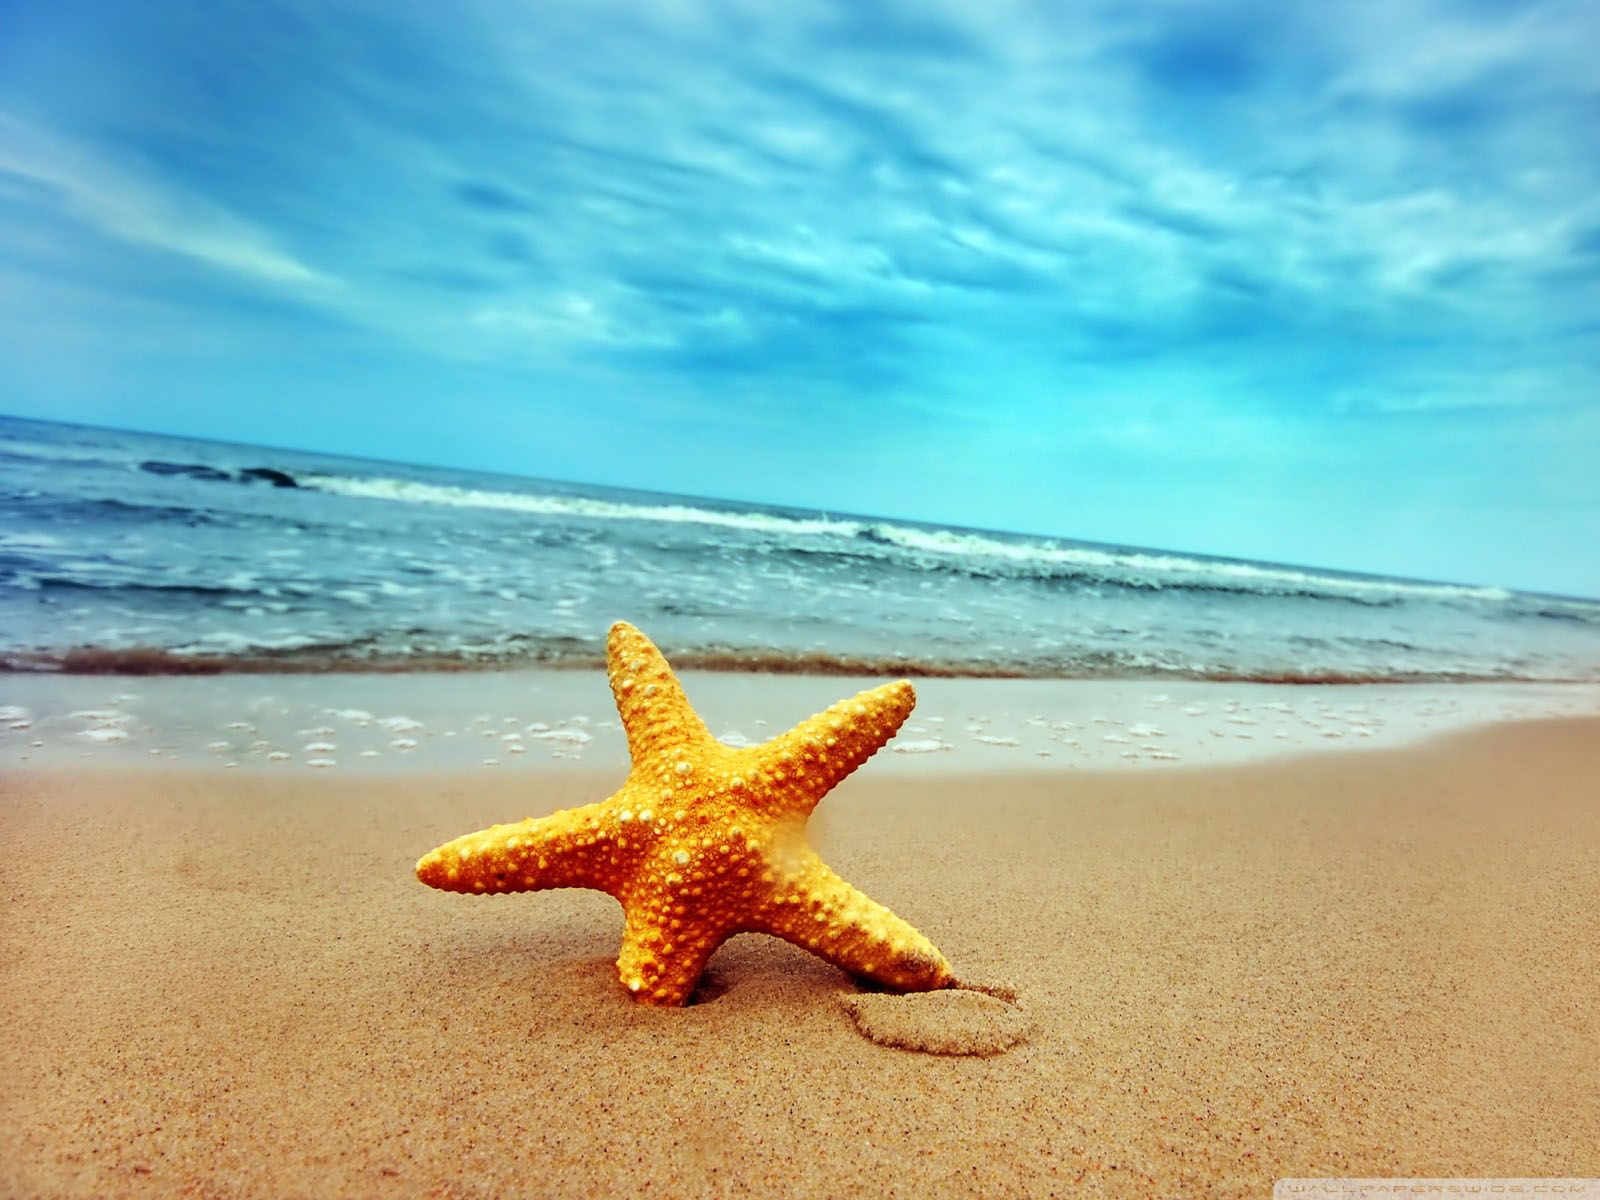 A starfish on the beach with waves in background - Starfish